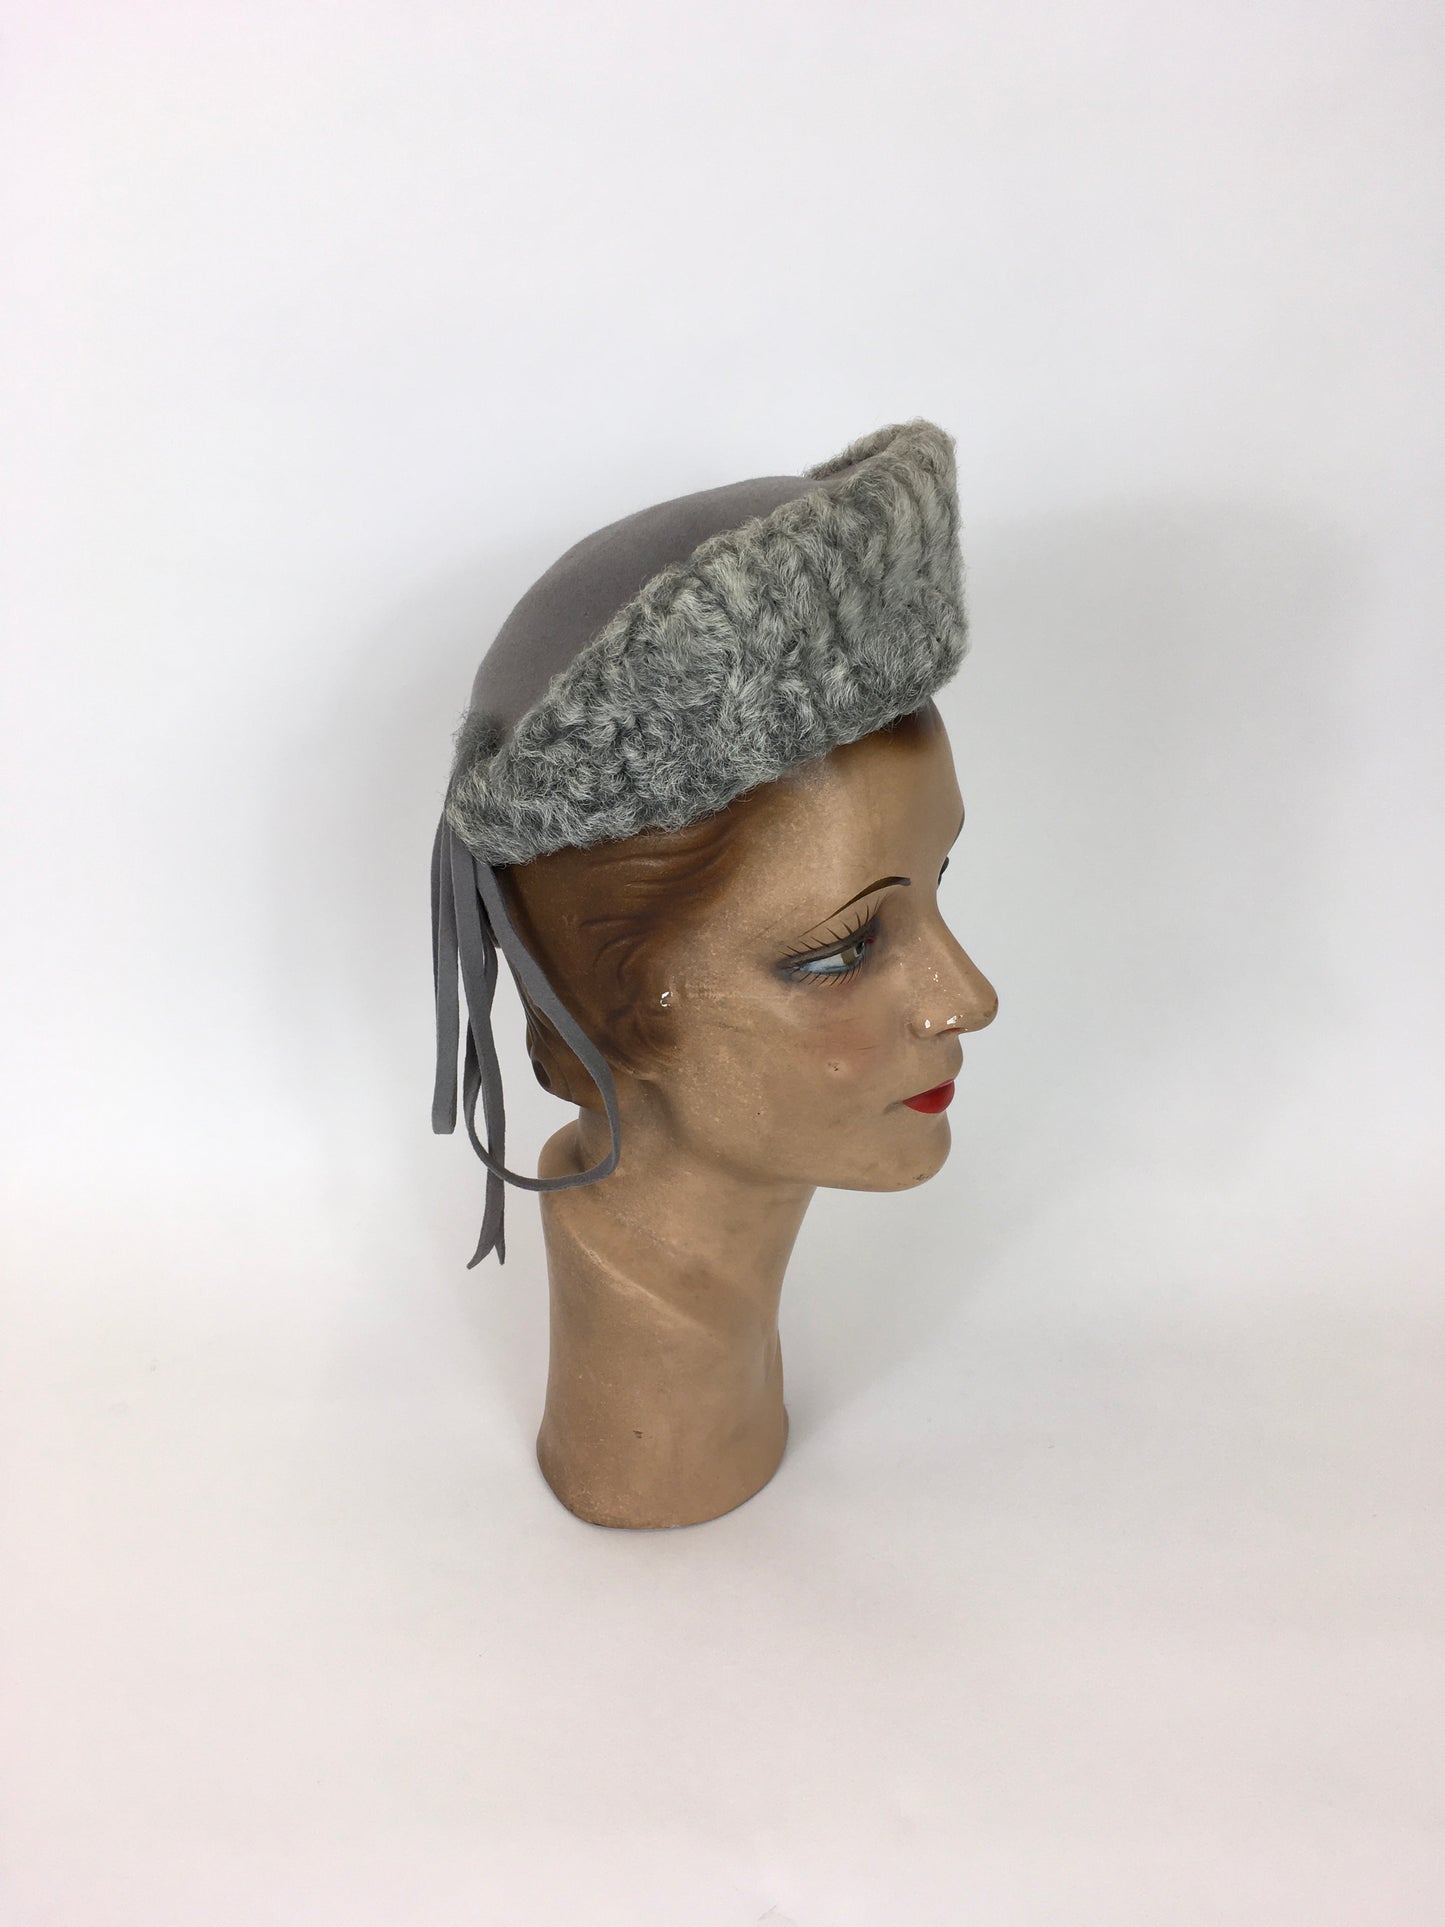 Original 1940s Beautiful Tilt Hat - In A Soft Icy Grey With Grey Astrakhan Trim